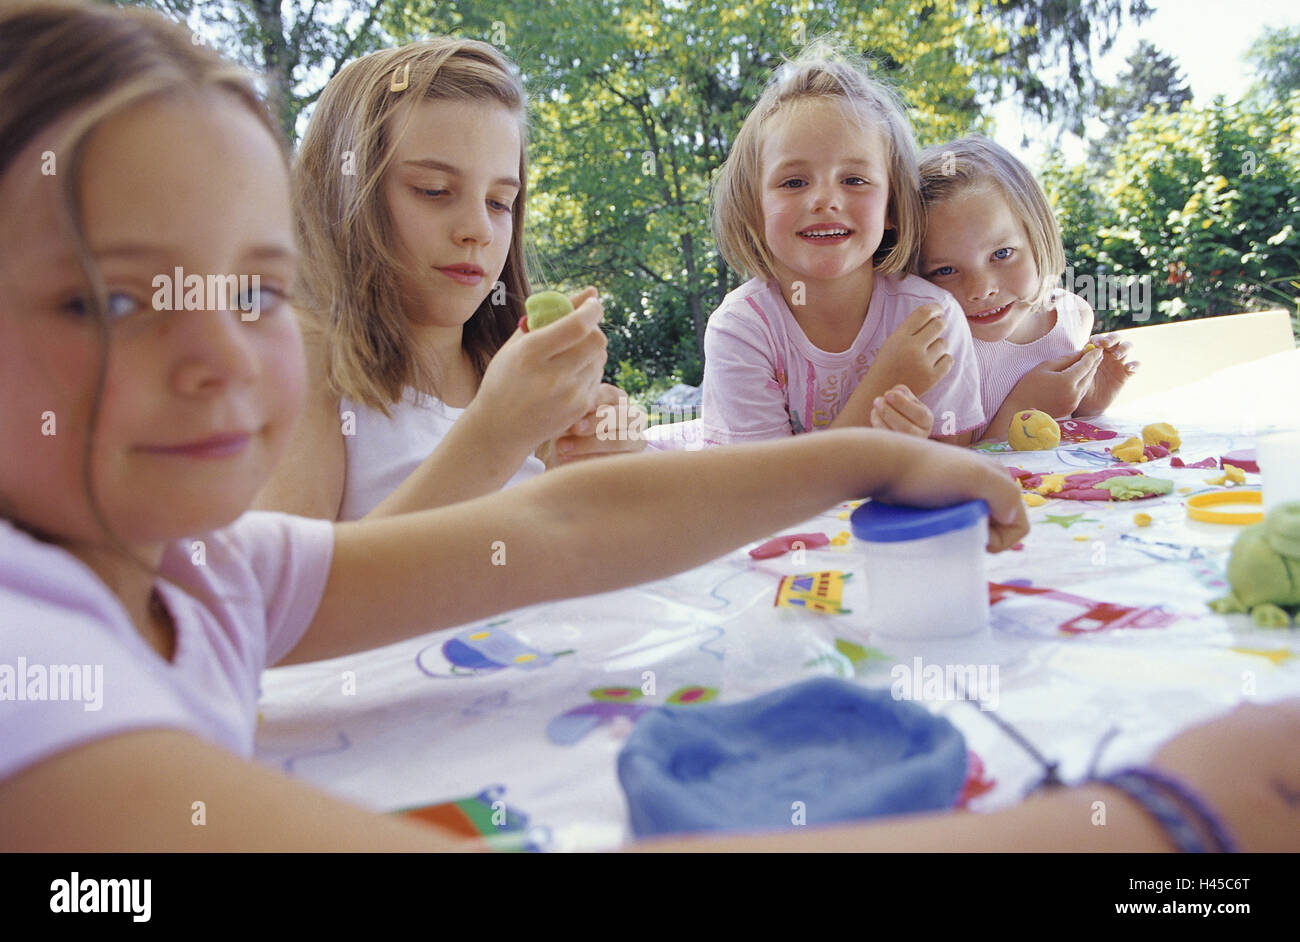 Girls, smile, do handicraft, plasticine, terrace table, person, children, siblings, friends, together, leisure time, creativity, knead, group work, support, learn, play, fun, summer, outside, concentrates, terrace, four, activity, leisure activity, Stock Photo